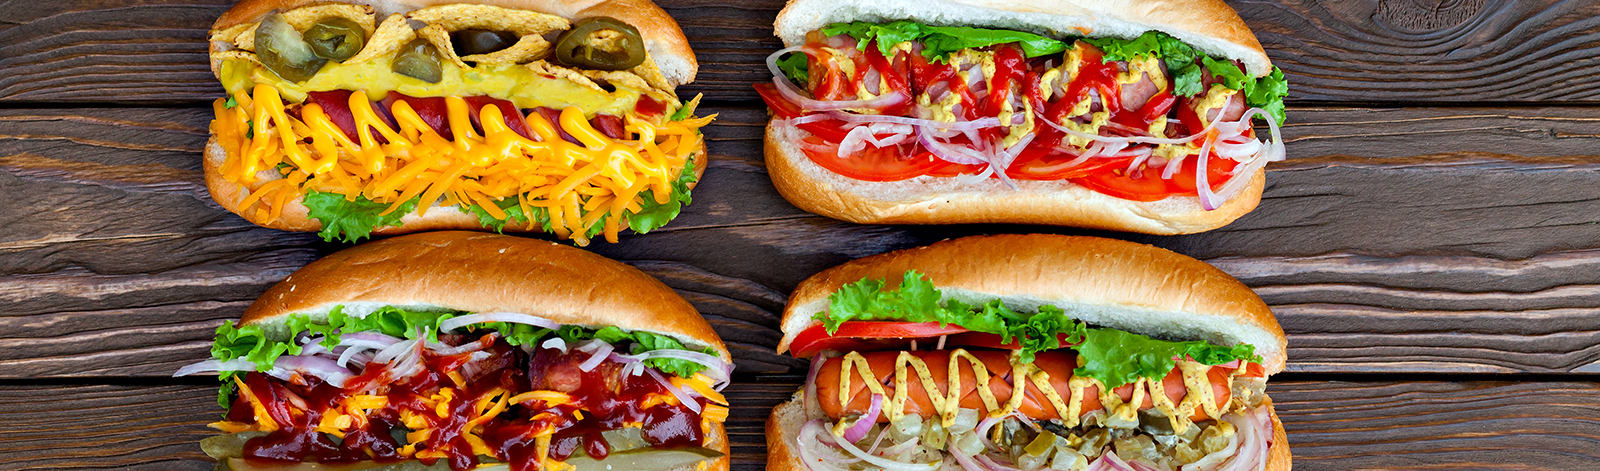 Various hot dogs on a wooden background